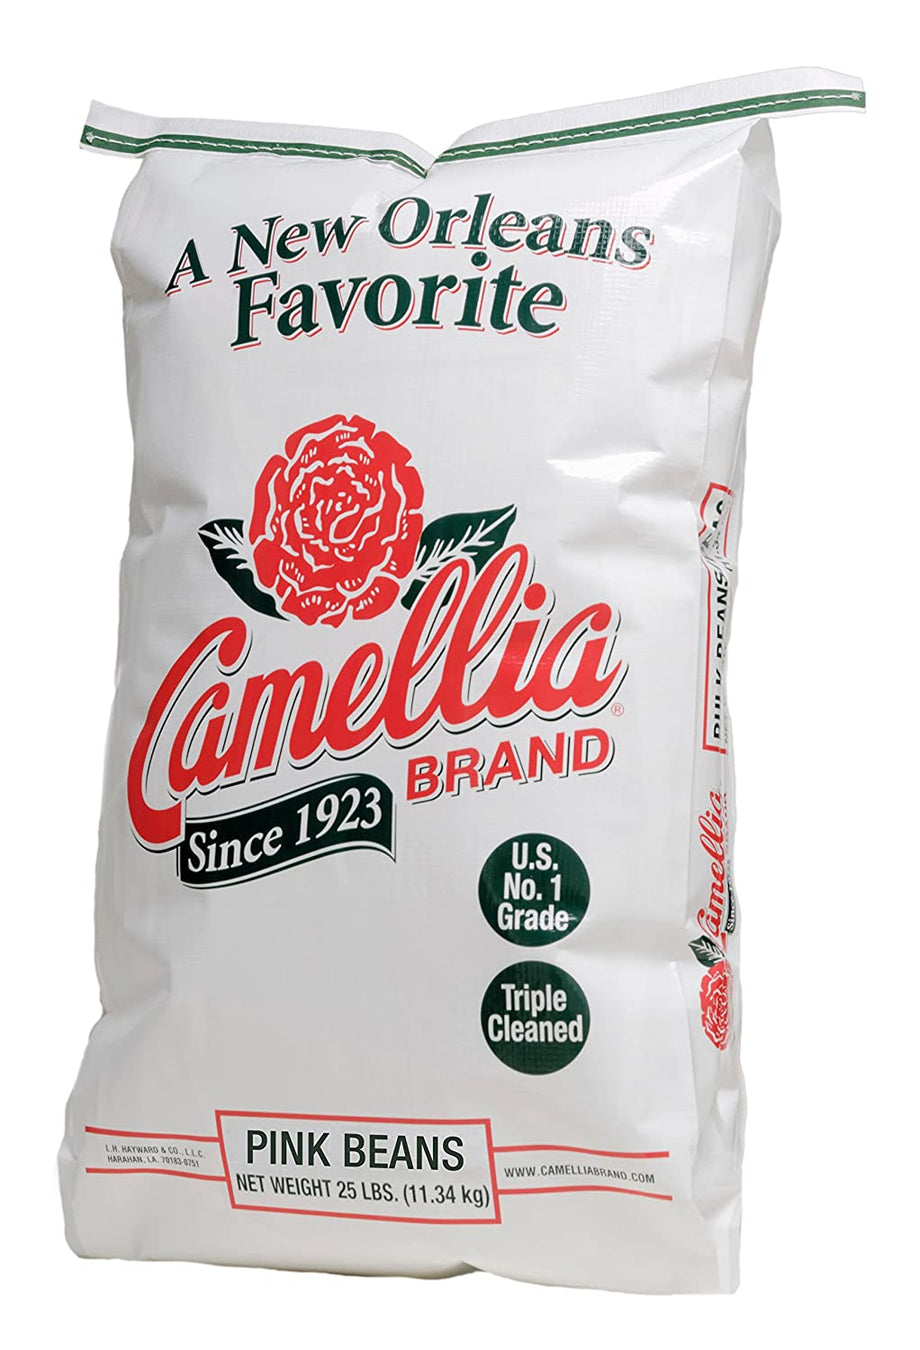 Camellia+BRAND+Red+Kidney+Beans+-+Dry+Bean+1+Pound+Bag for sale online